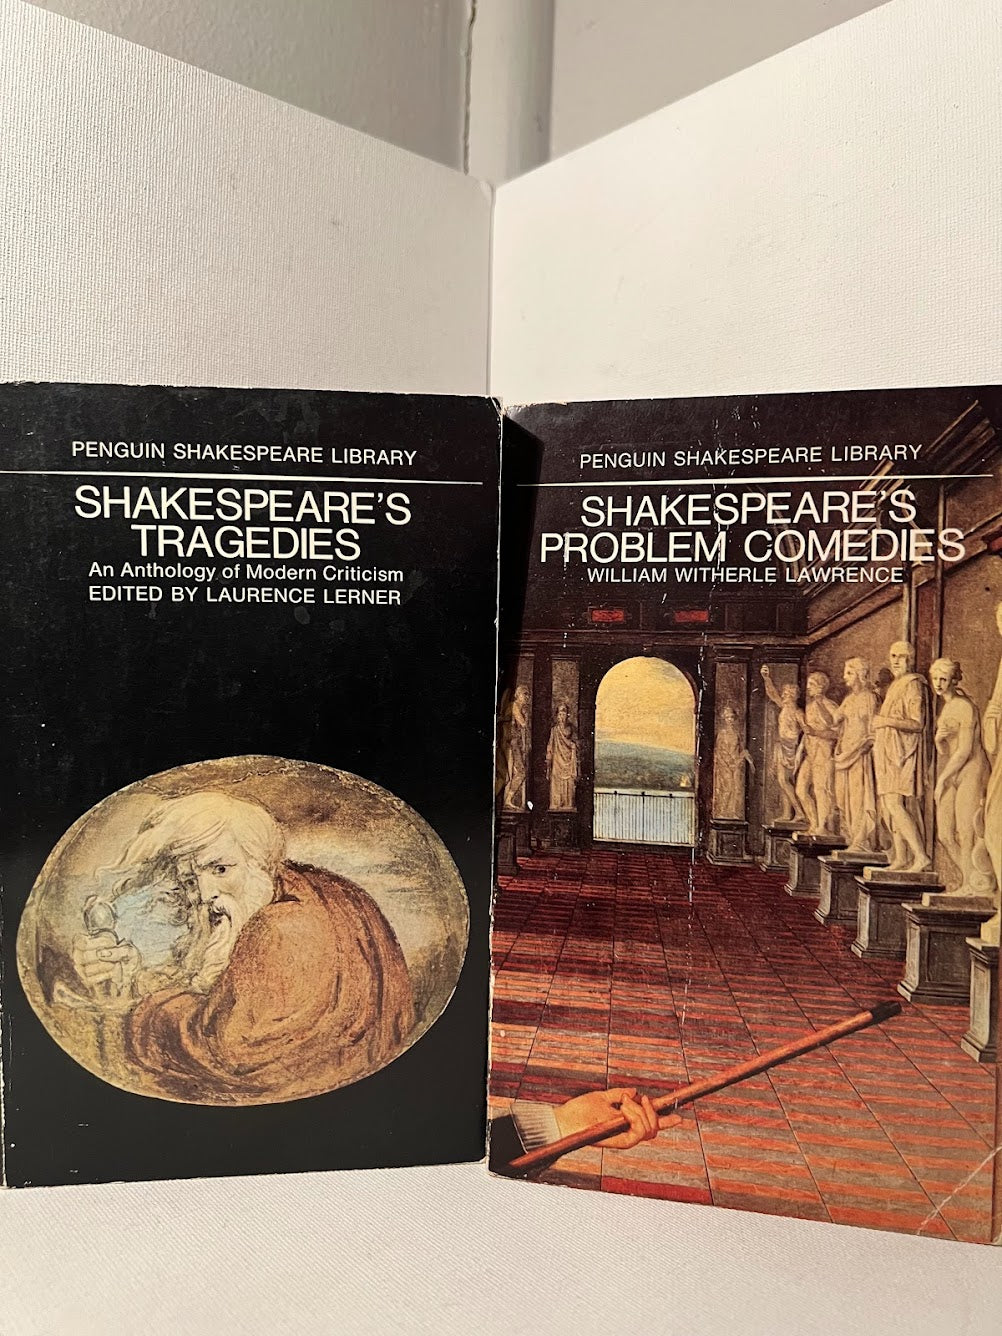 Shakespeare's Tragedies & Shakespeare's Problem Comedies